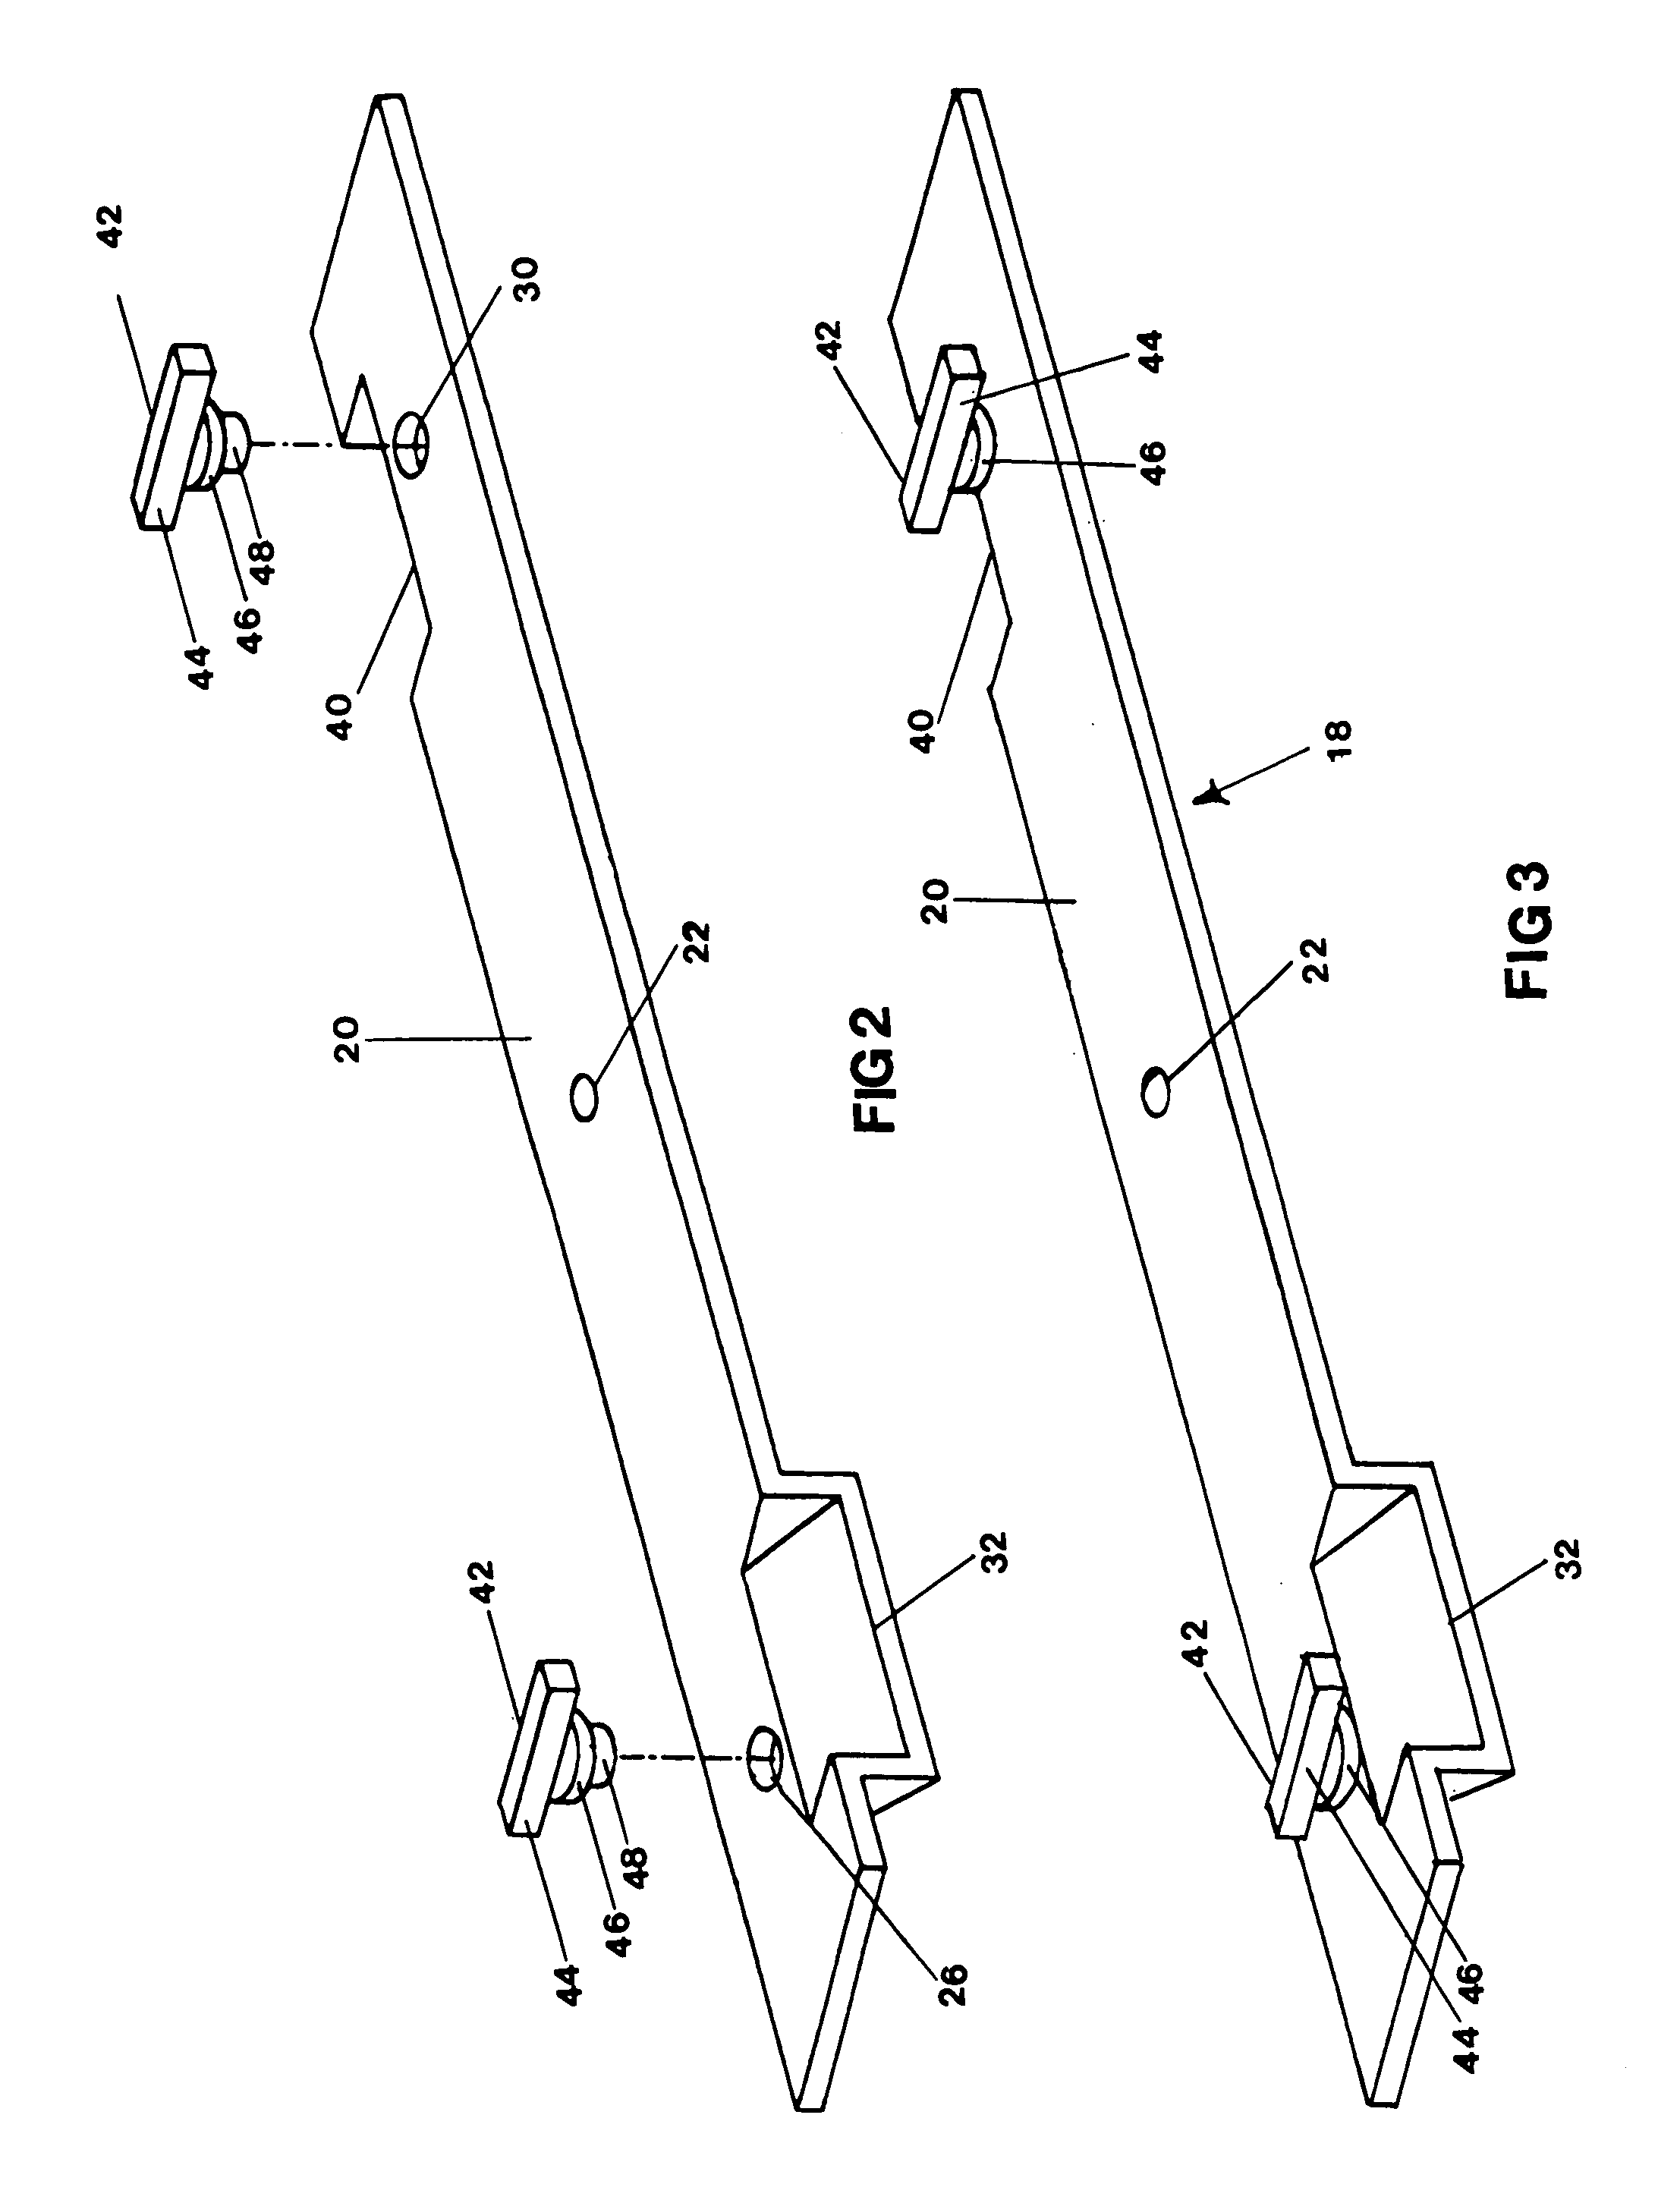 Rotary lawnmower blade with reversible replaceable blades